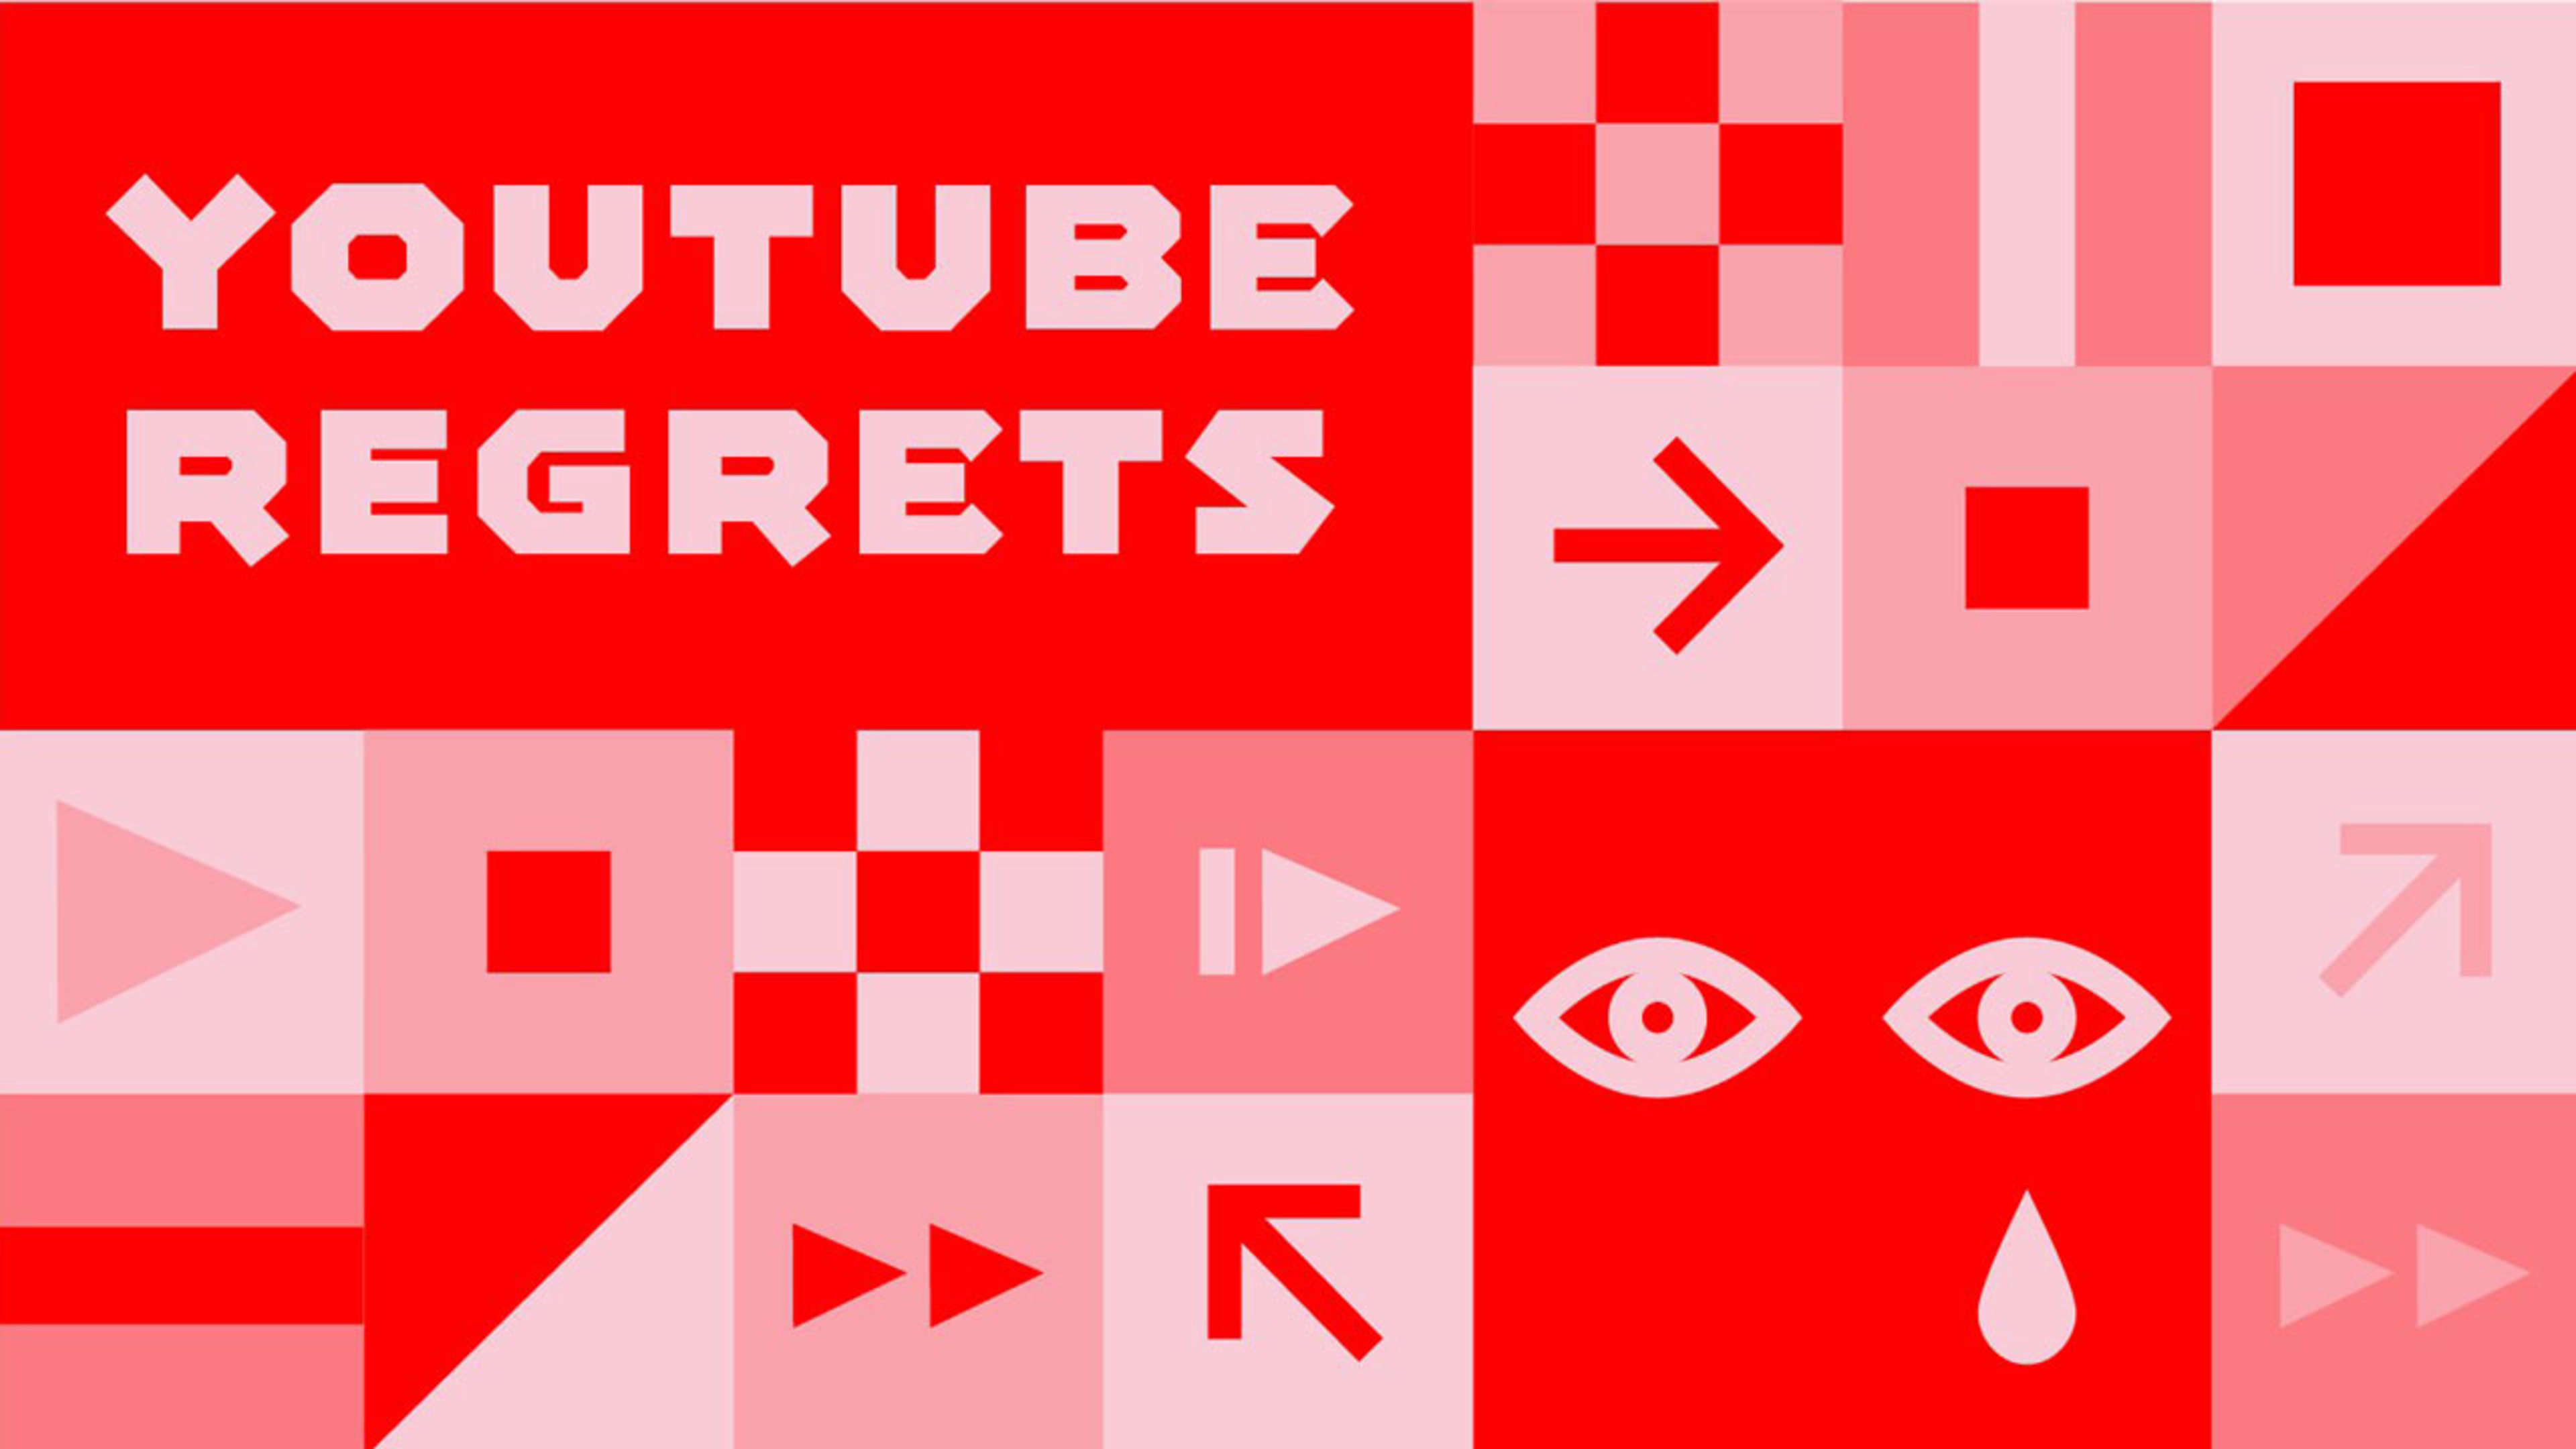 Read real stories of how YouTube pushed people down shocking rabbit holes